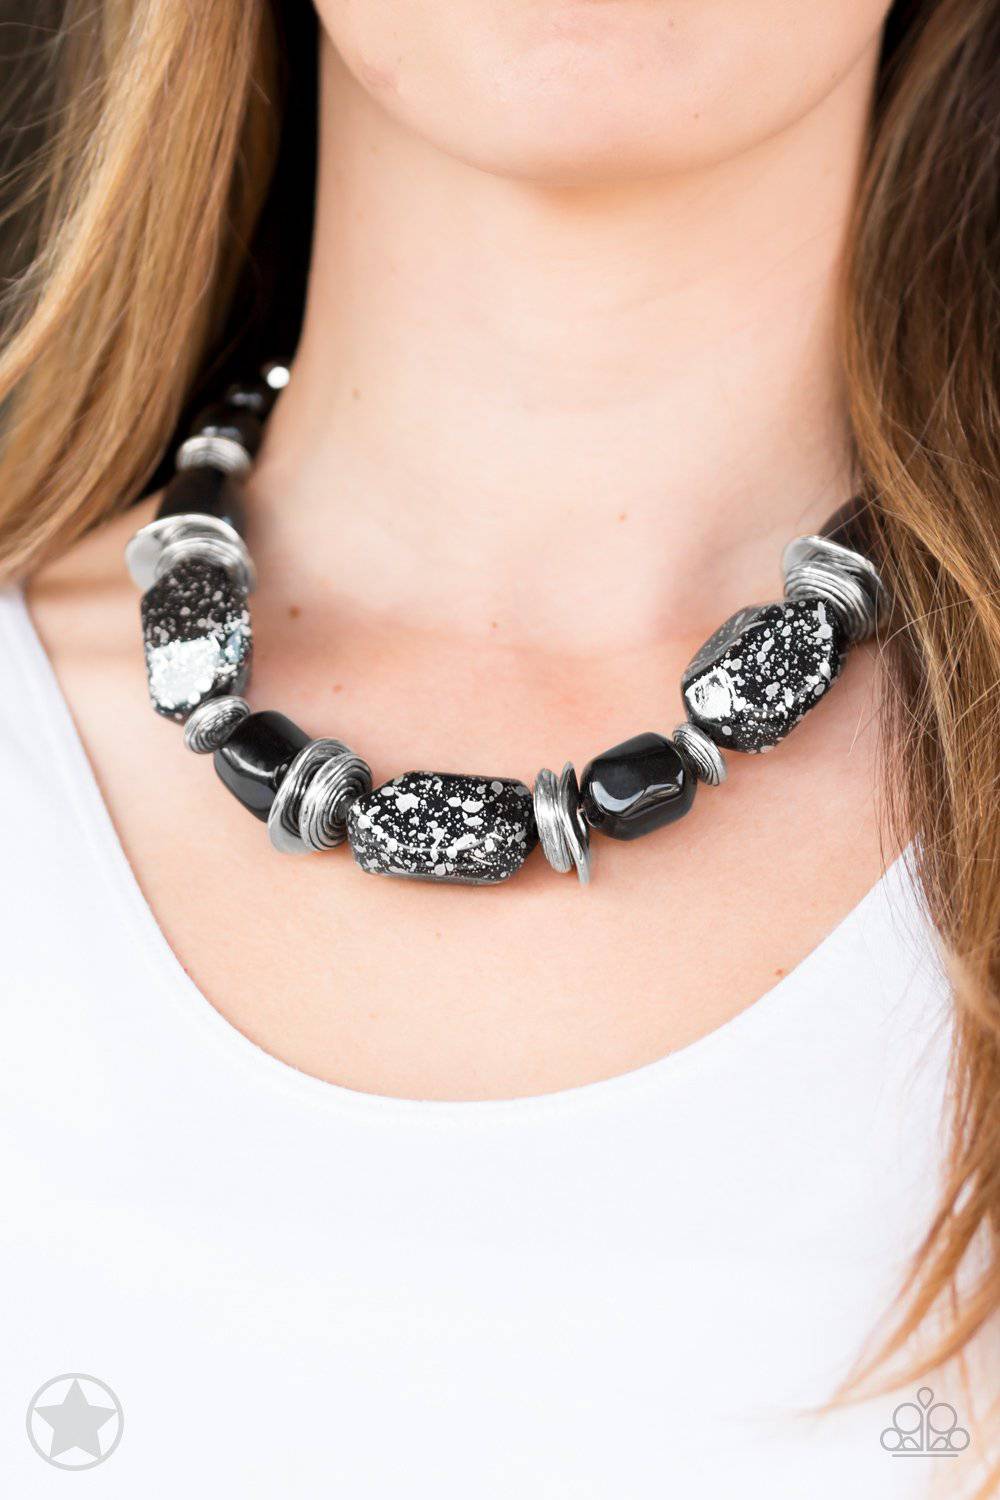 A9 - In Good Glazes Black Necklace and Bracelet Set by Paparazzi Accessories on Fancy5Fashion.com